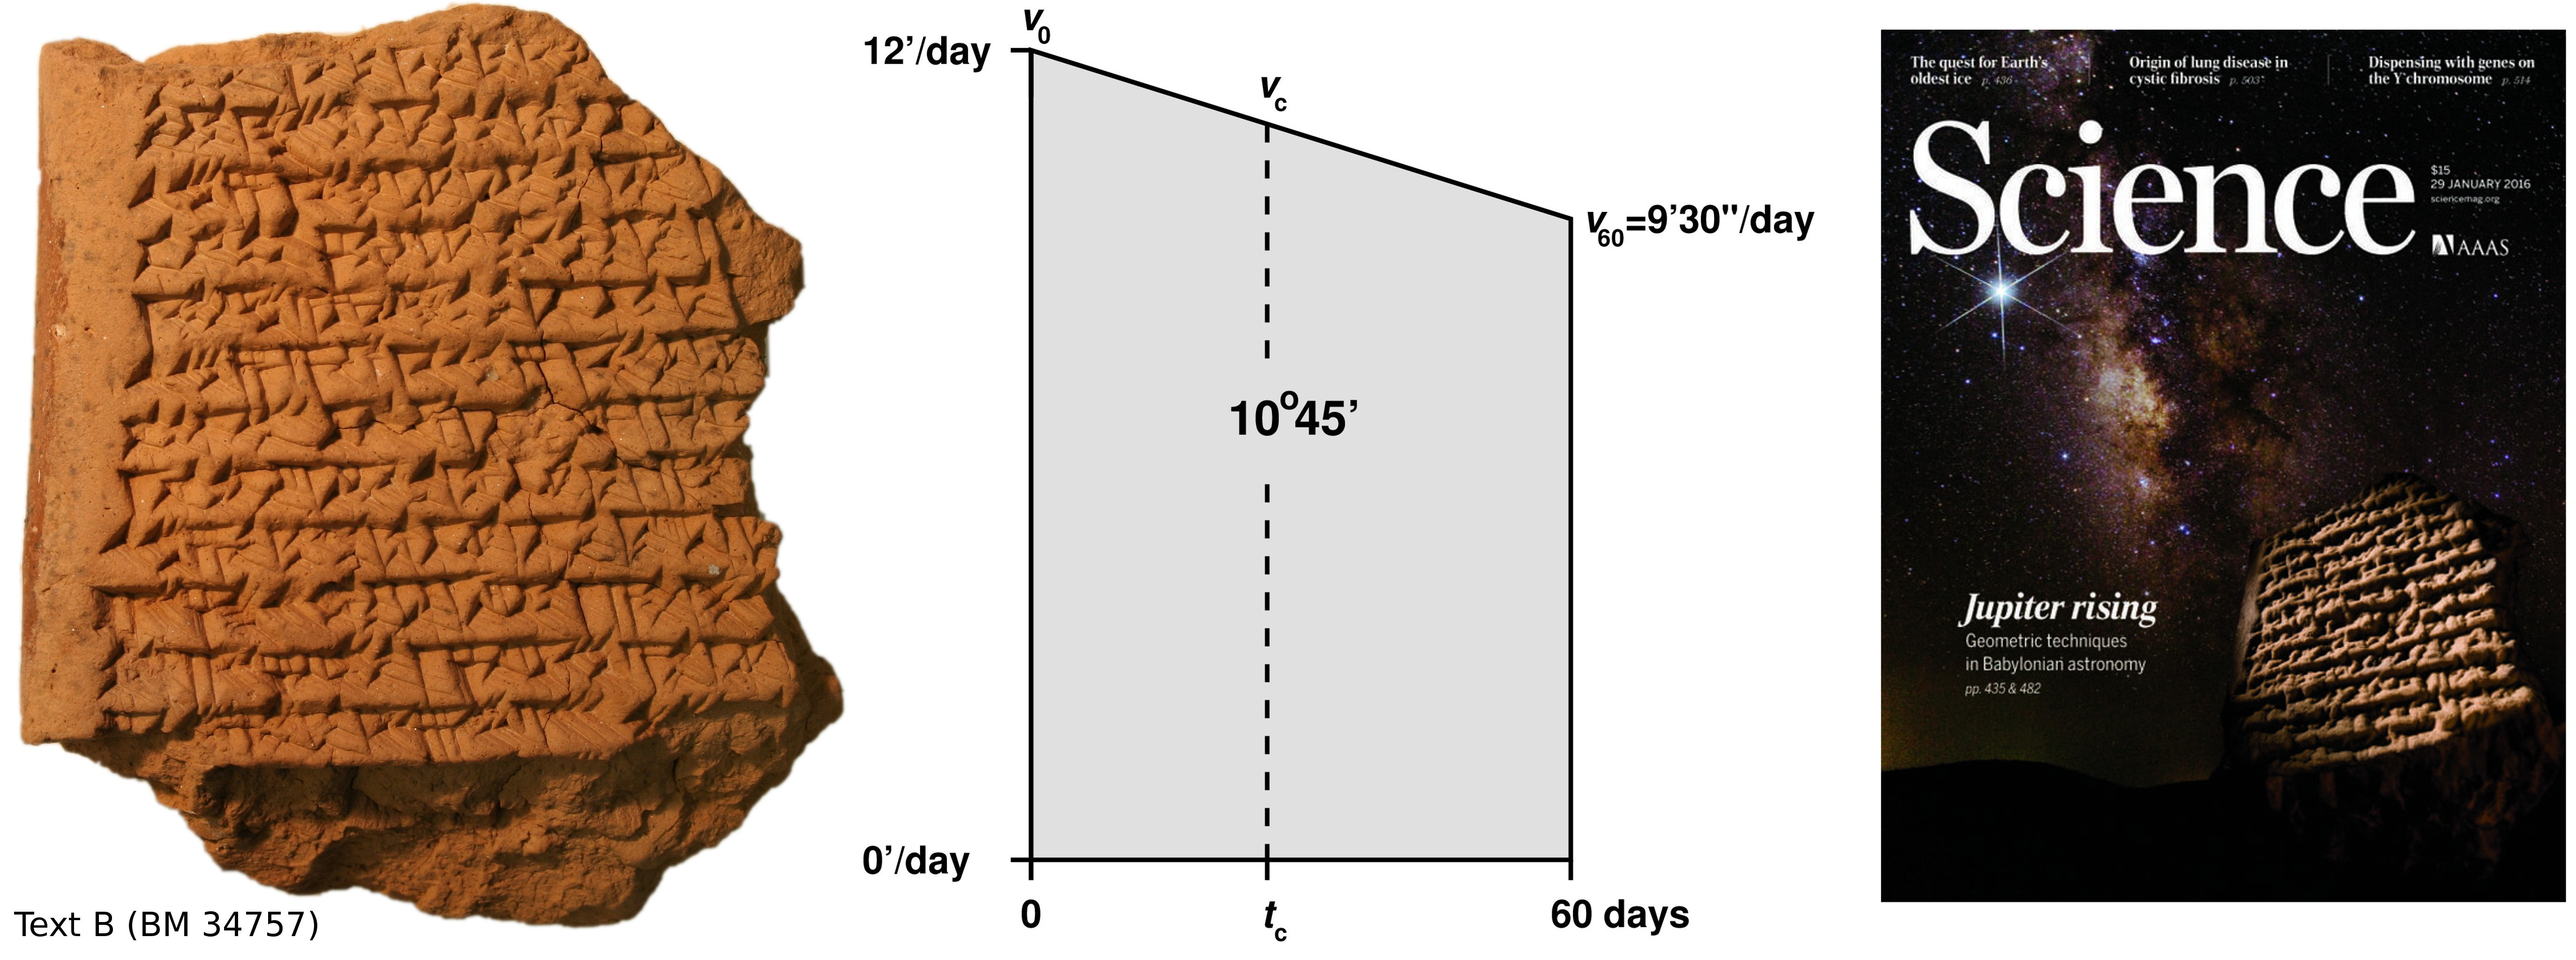 Left: Cuneiform tablet with calculations involving a trapezoid. Right: The distance travelled by Jupiter after 60 days, 10º45', is computed as the area of the trapezoid. The trapezoid is then divided into two smaller ones of equal area in order to find the time in which Jupiter covers half this distance (M. Ossendrijver, 2016, Science 35, 482-484). Photo and illustration: Trustees of the British Museum/Mathieu Ossendrijver